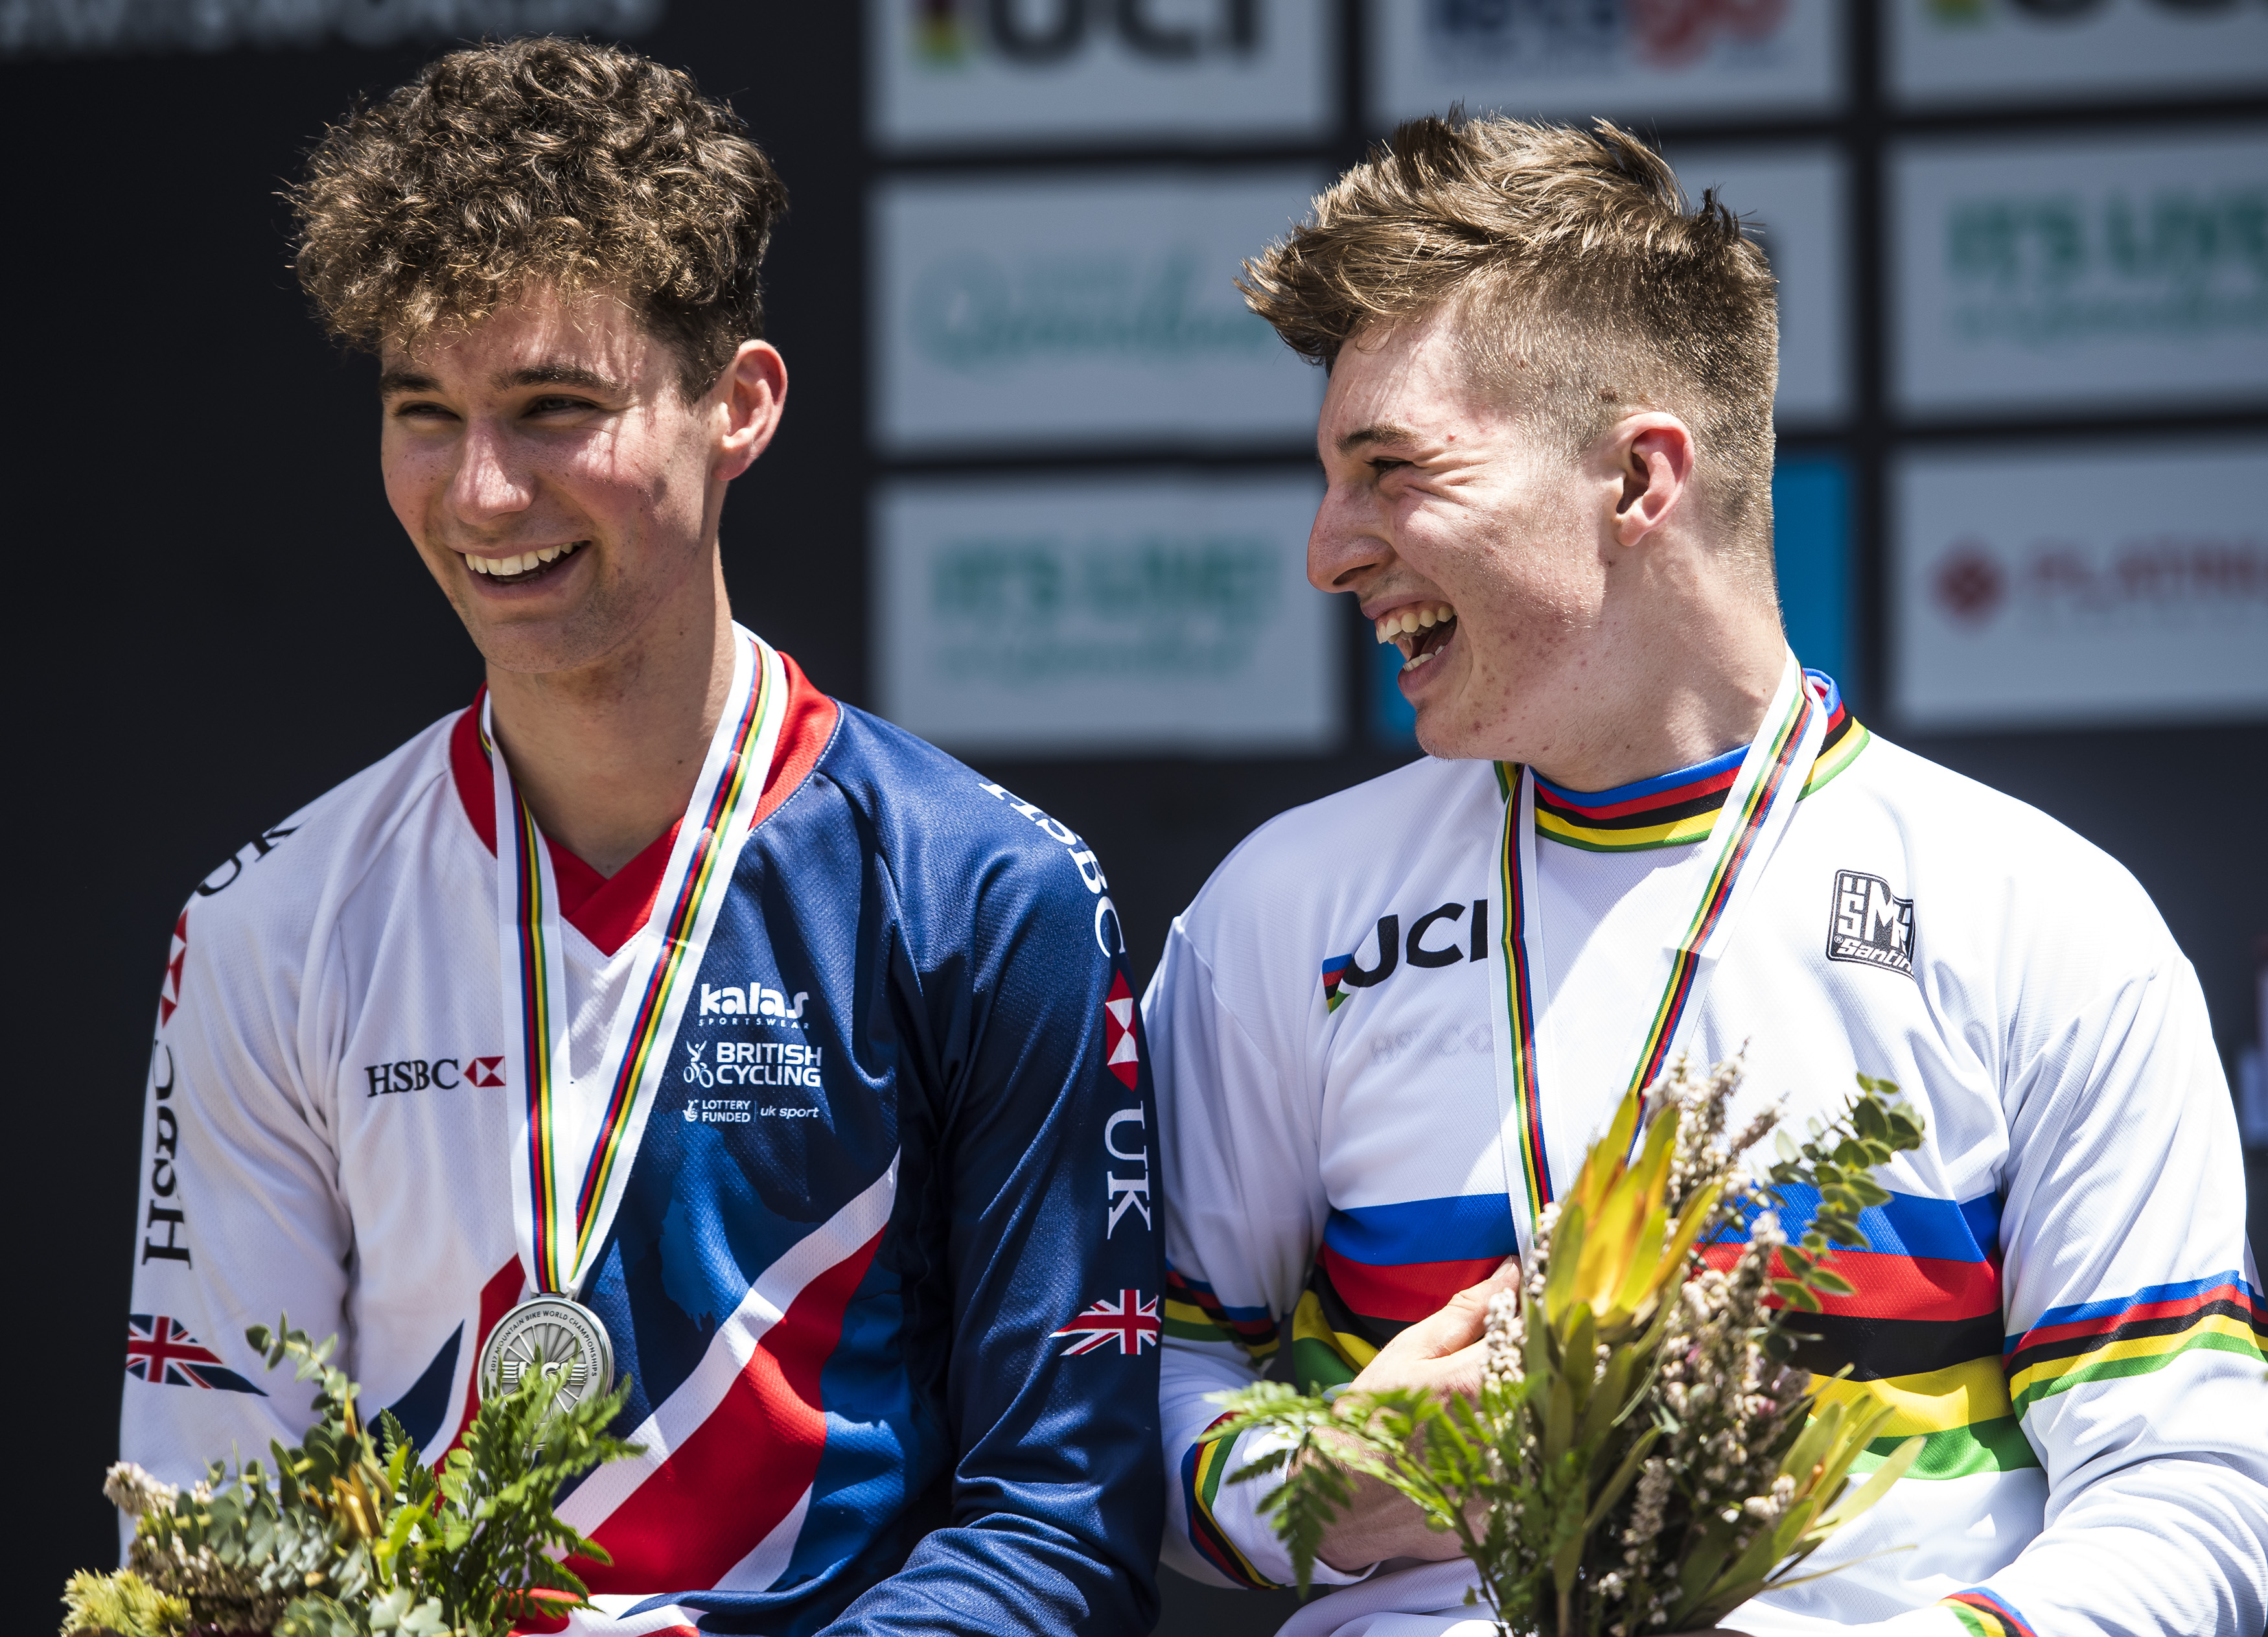 Matt Walker and Joe Breeden celebrated gold and silver respectively in the junior men’s downhill at the UCI Mountain Bike World Championships